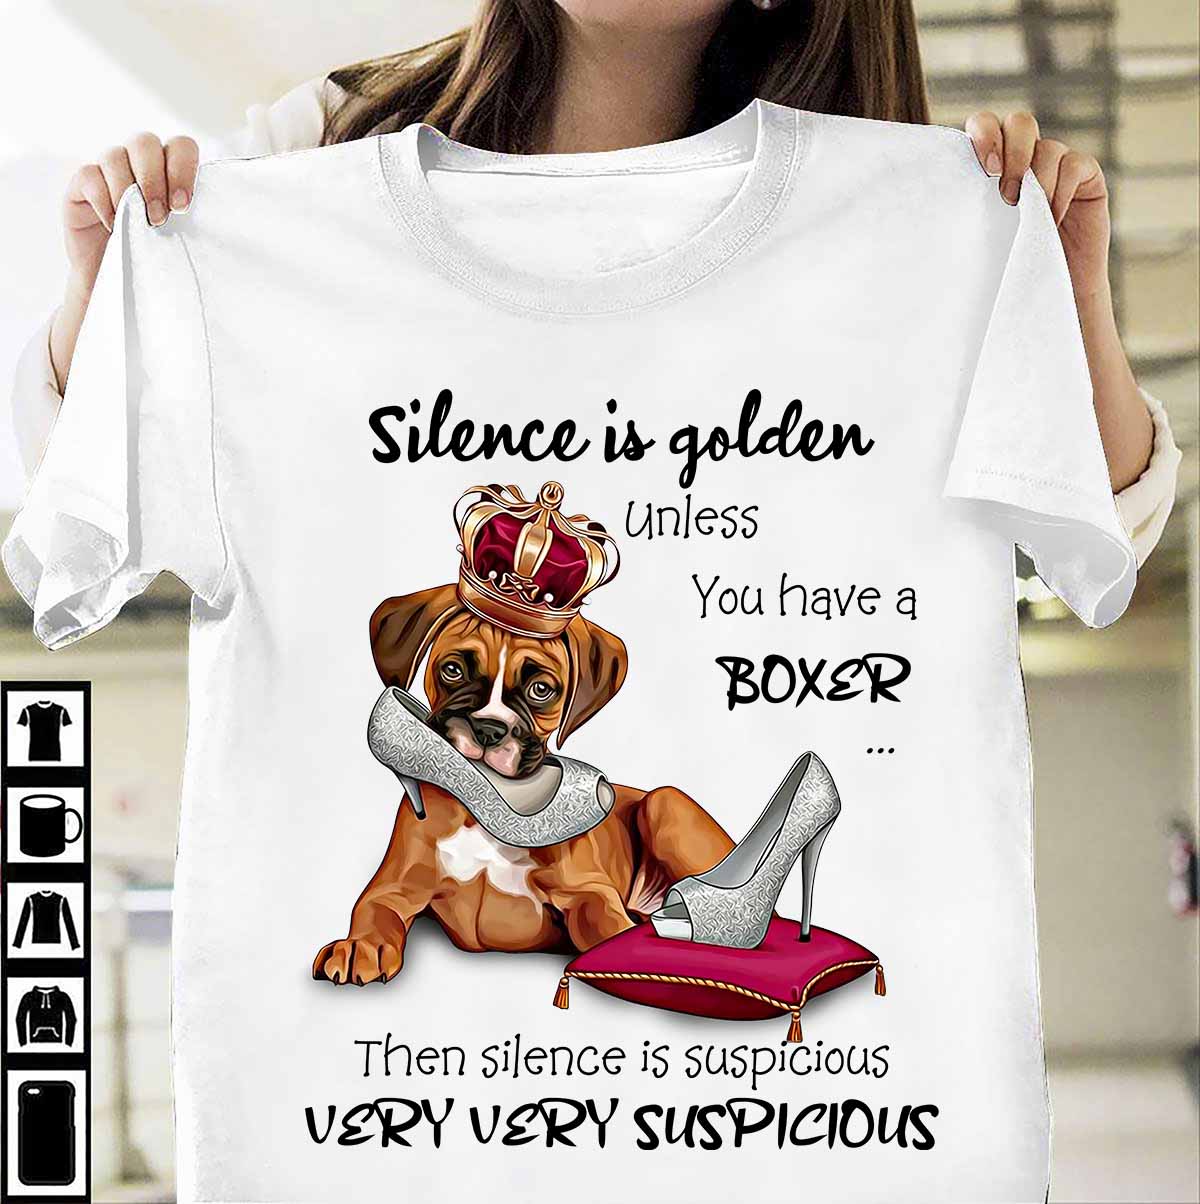 Silence is golden unless you have a boxer then silence is suspicious